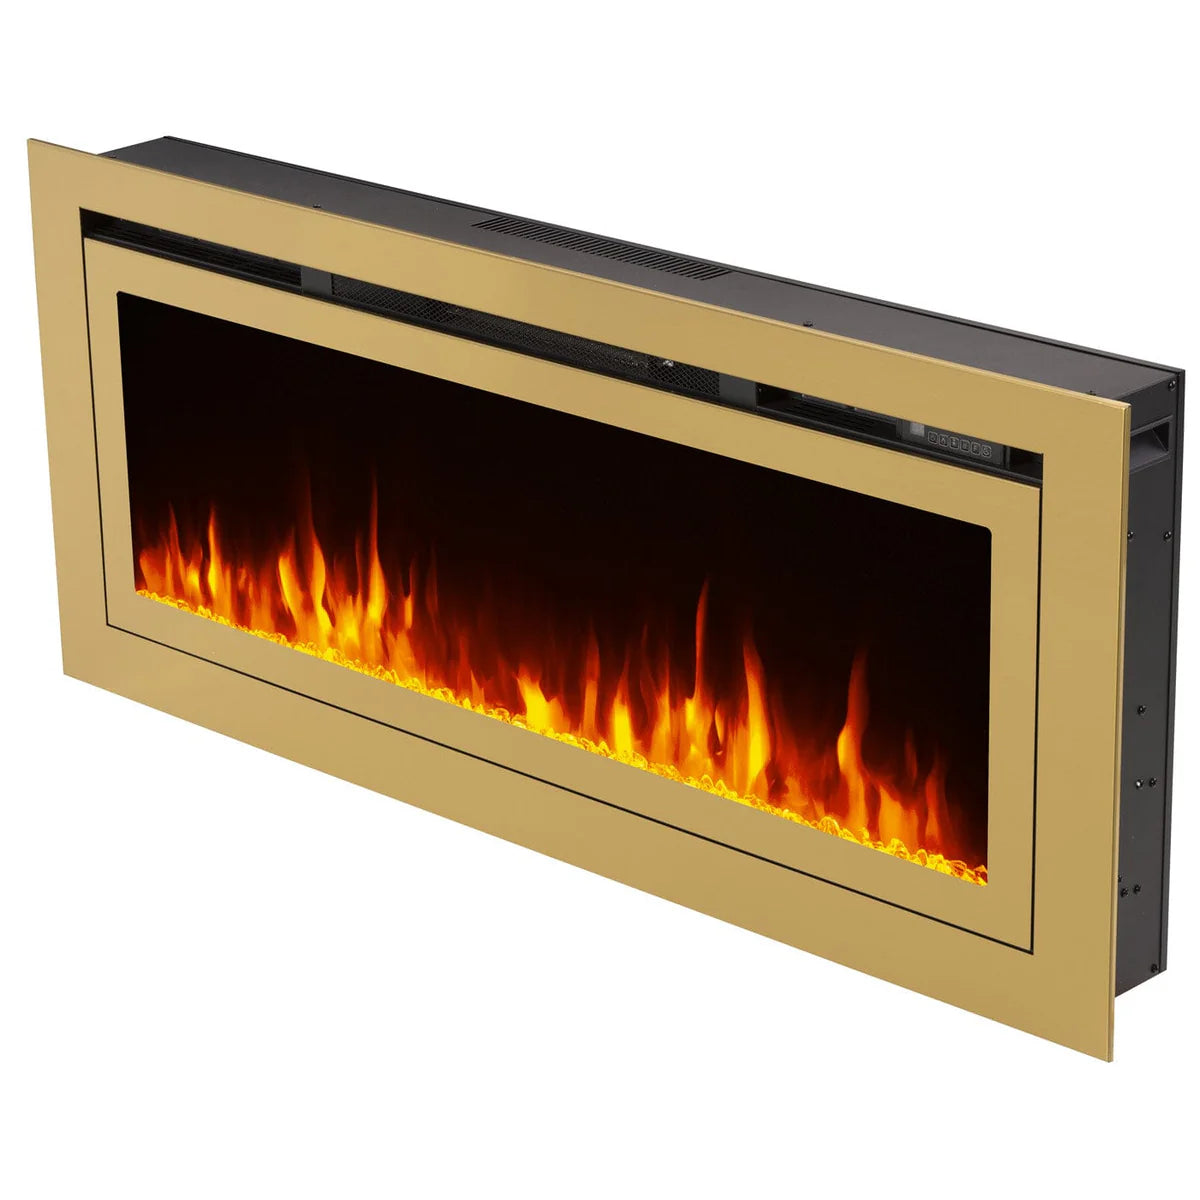 The Sideline Deluxe Gold 60 Inch Recessed Smart Electric Fireplace 86276